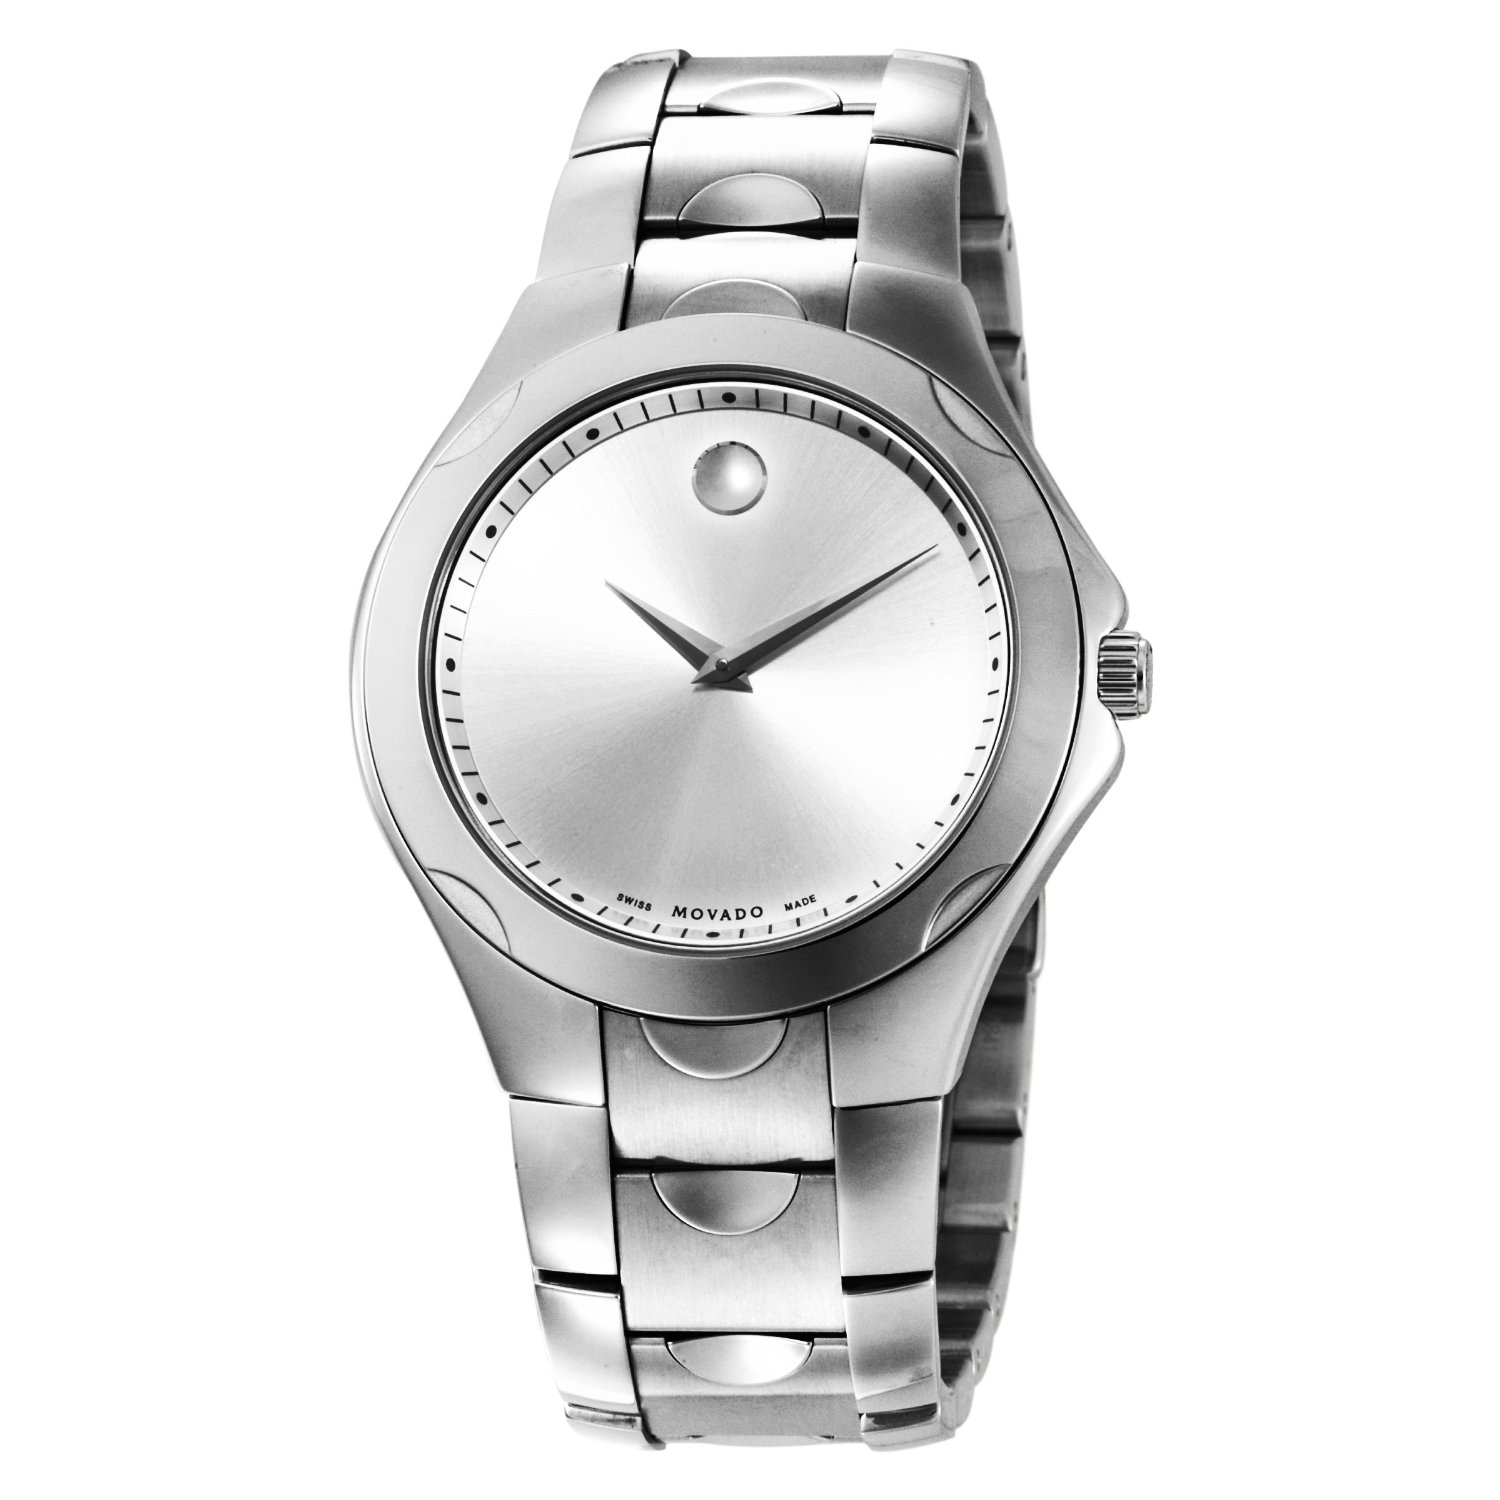 606379 Movado Men's Luno Sport Stainless Steel Case and Bracelet Watch